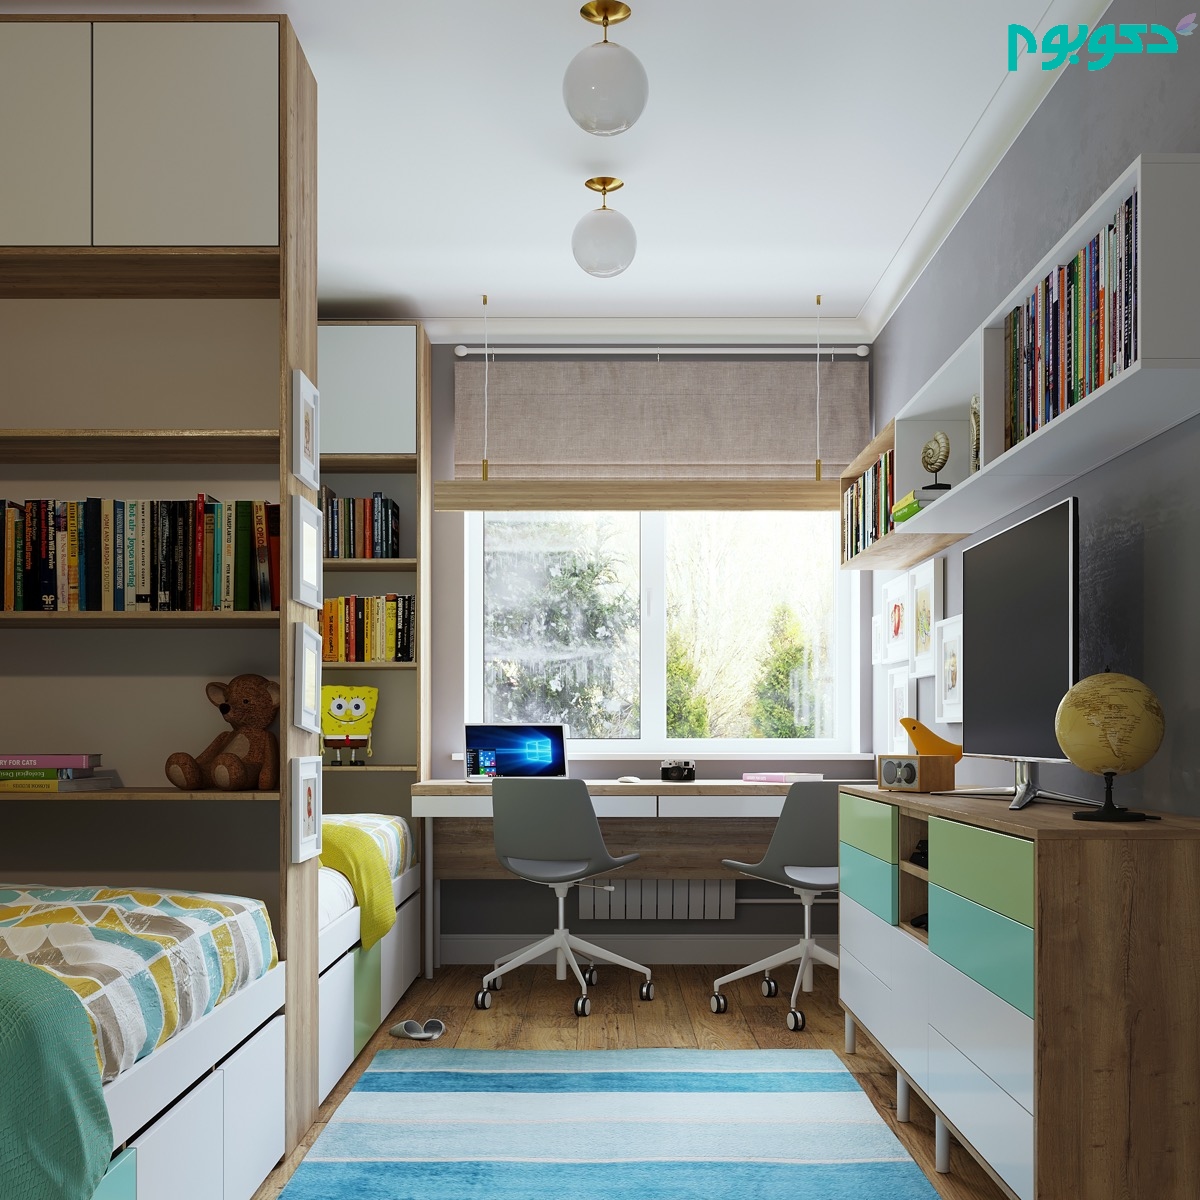 shared-kids-rooms